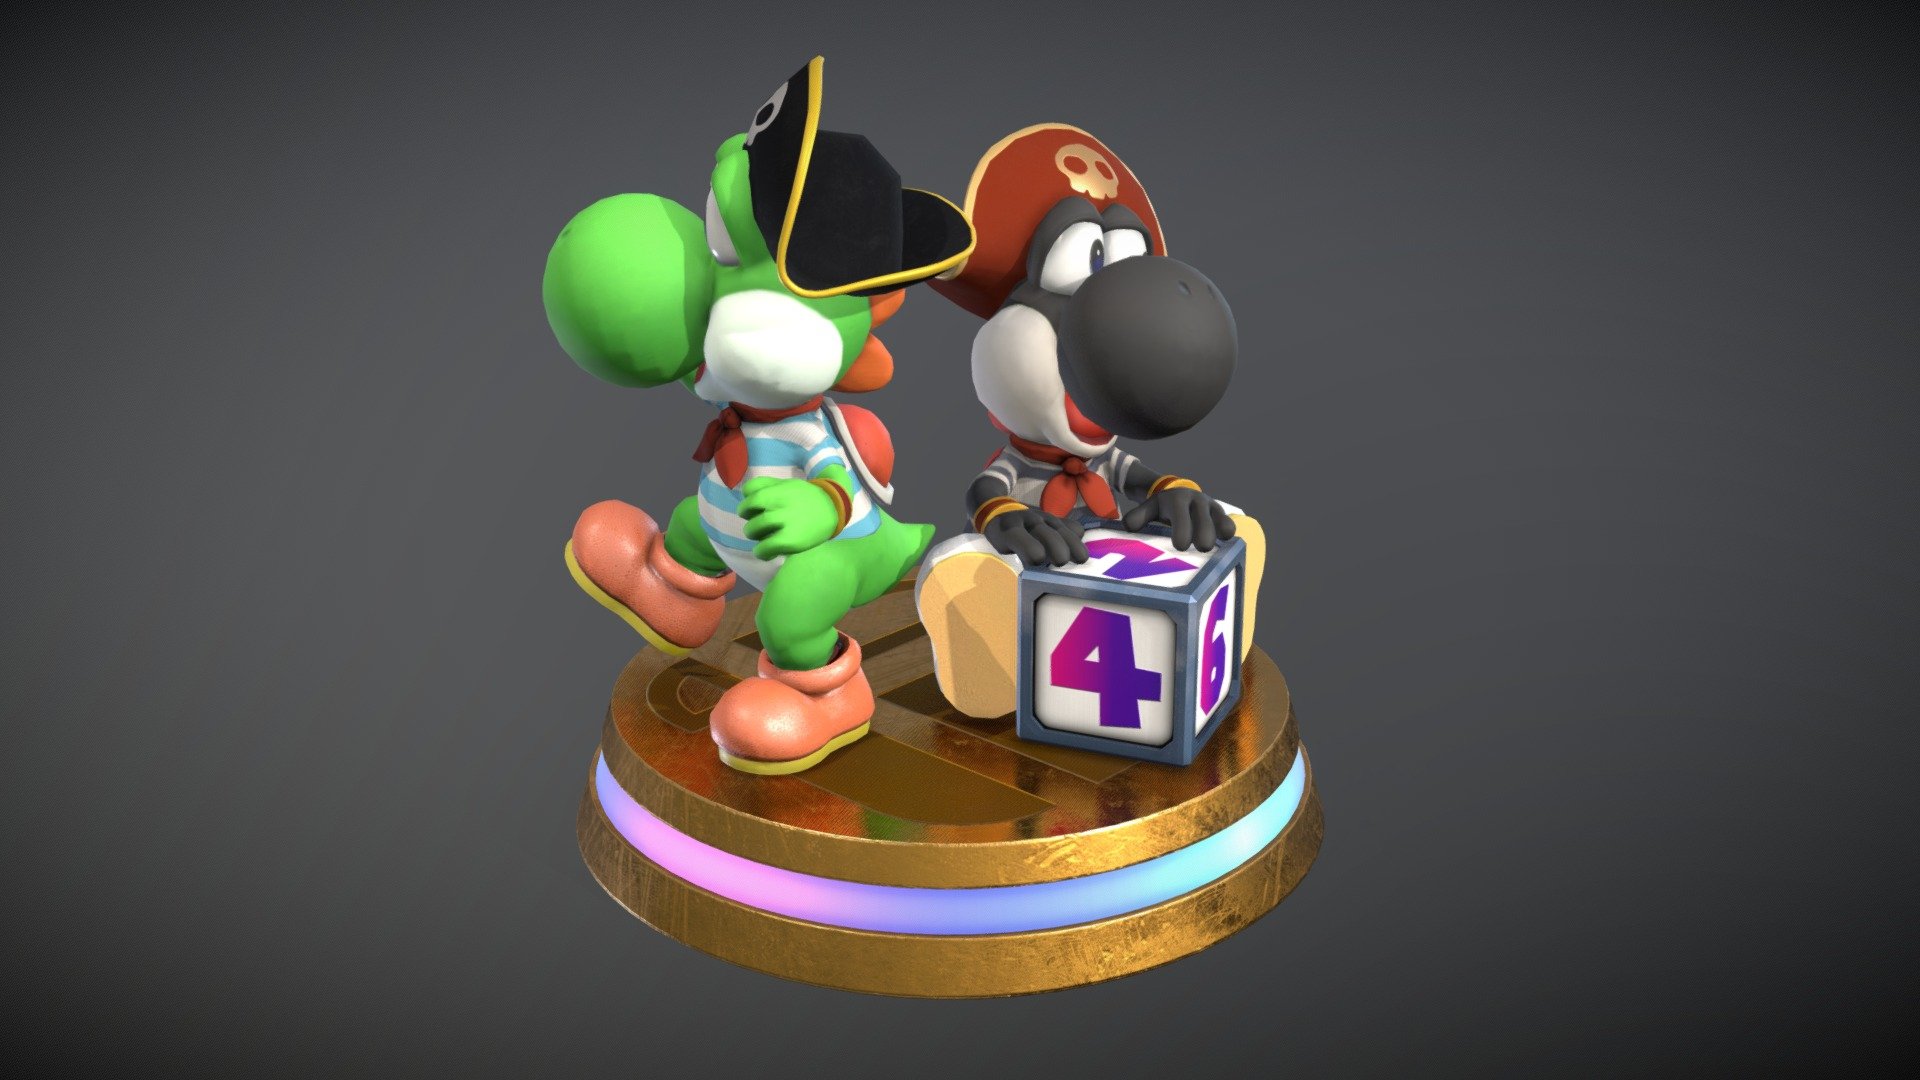 Captain Yoshi as seen in his Pirate Land costume from &ldquo;Mario Party 2